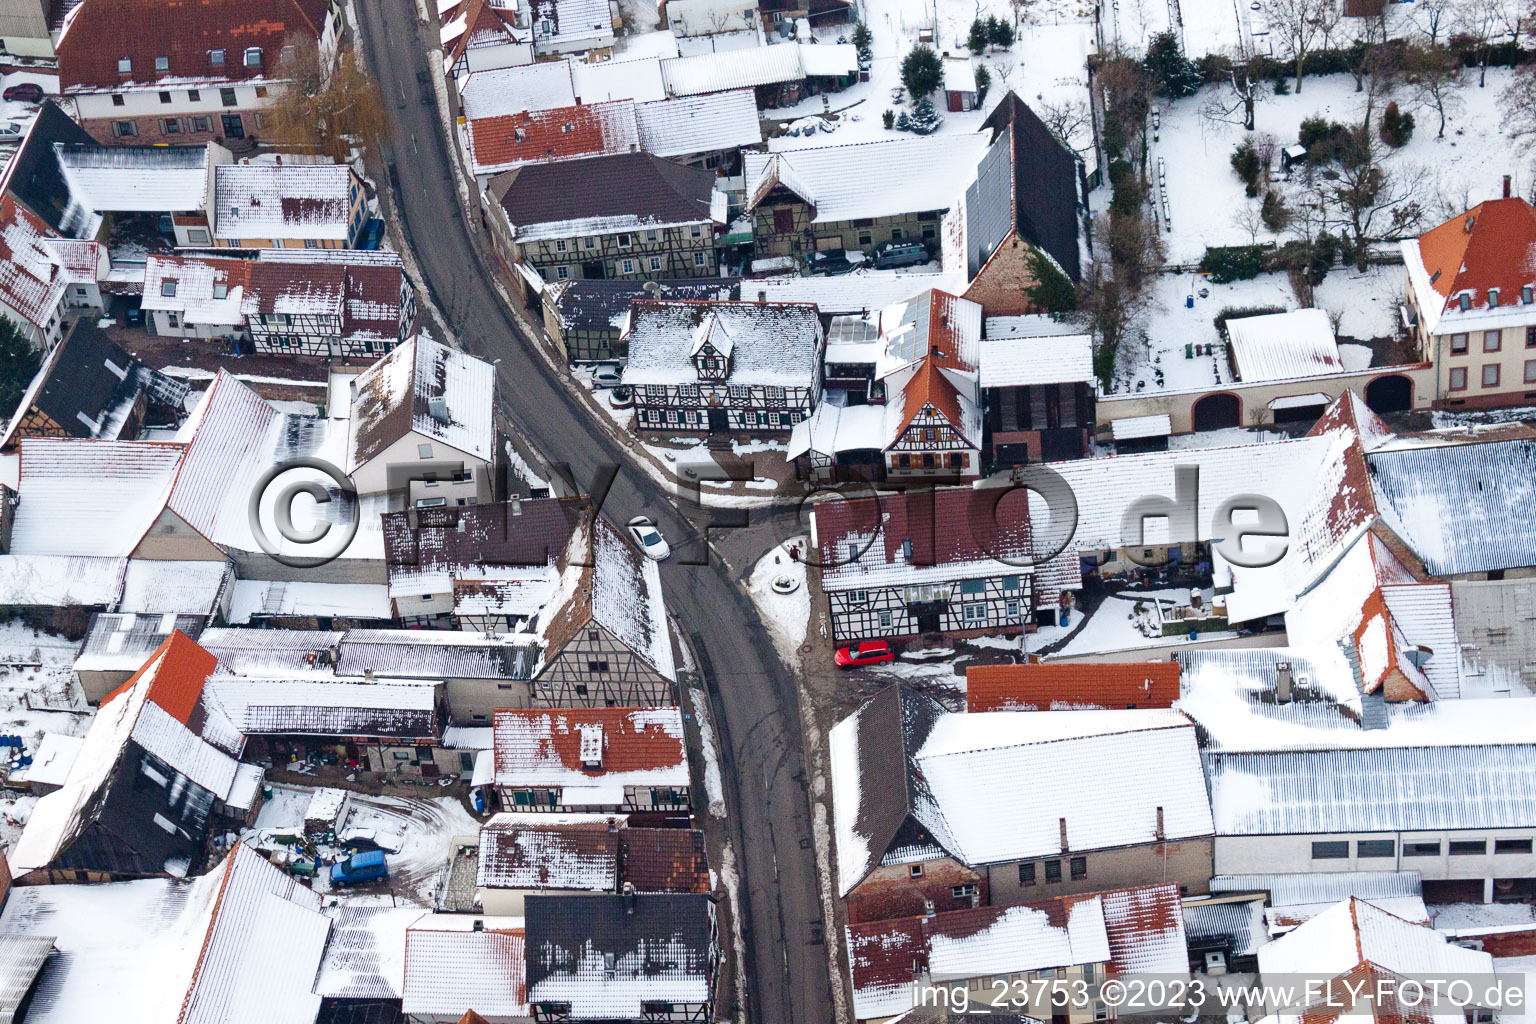 Aerial view of City hall in Winden in the state Rhineland-Palatinate, Germany